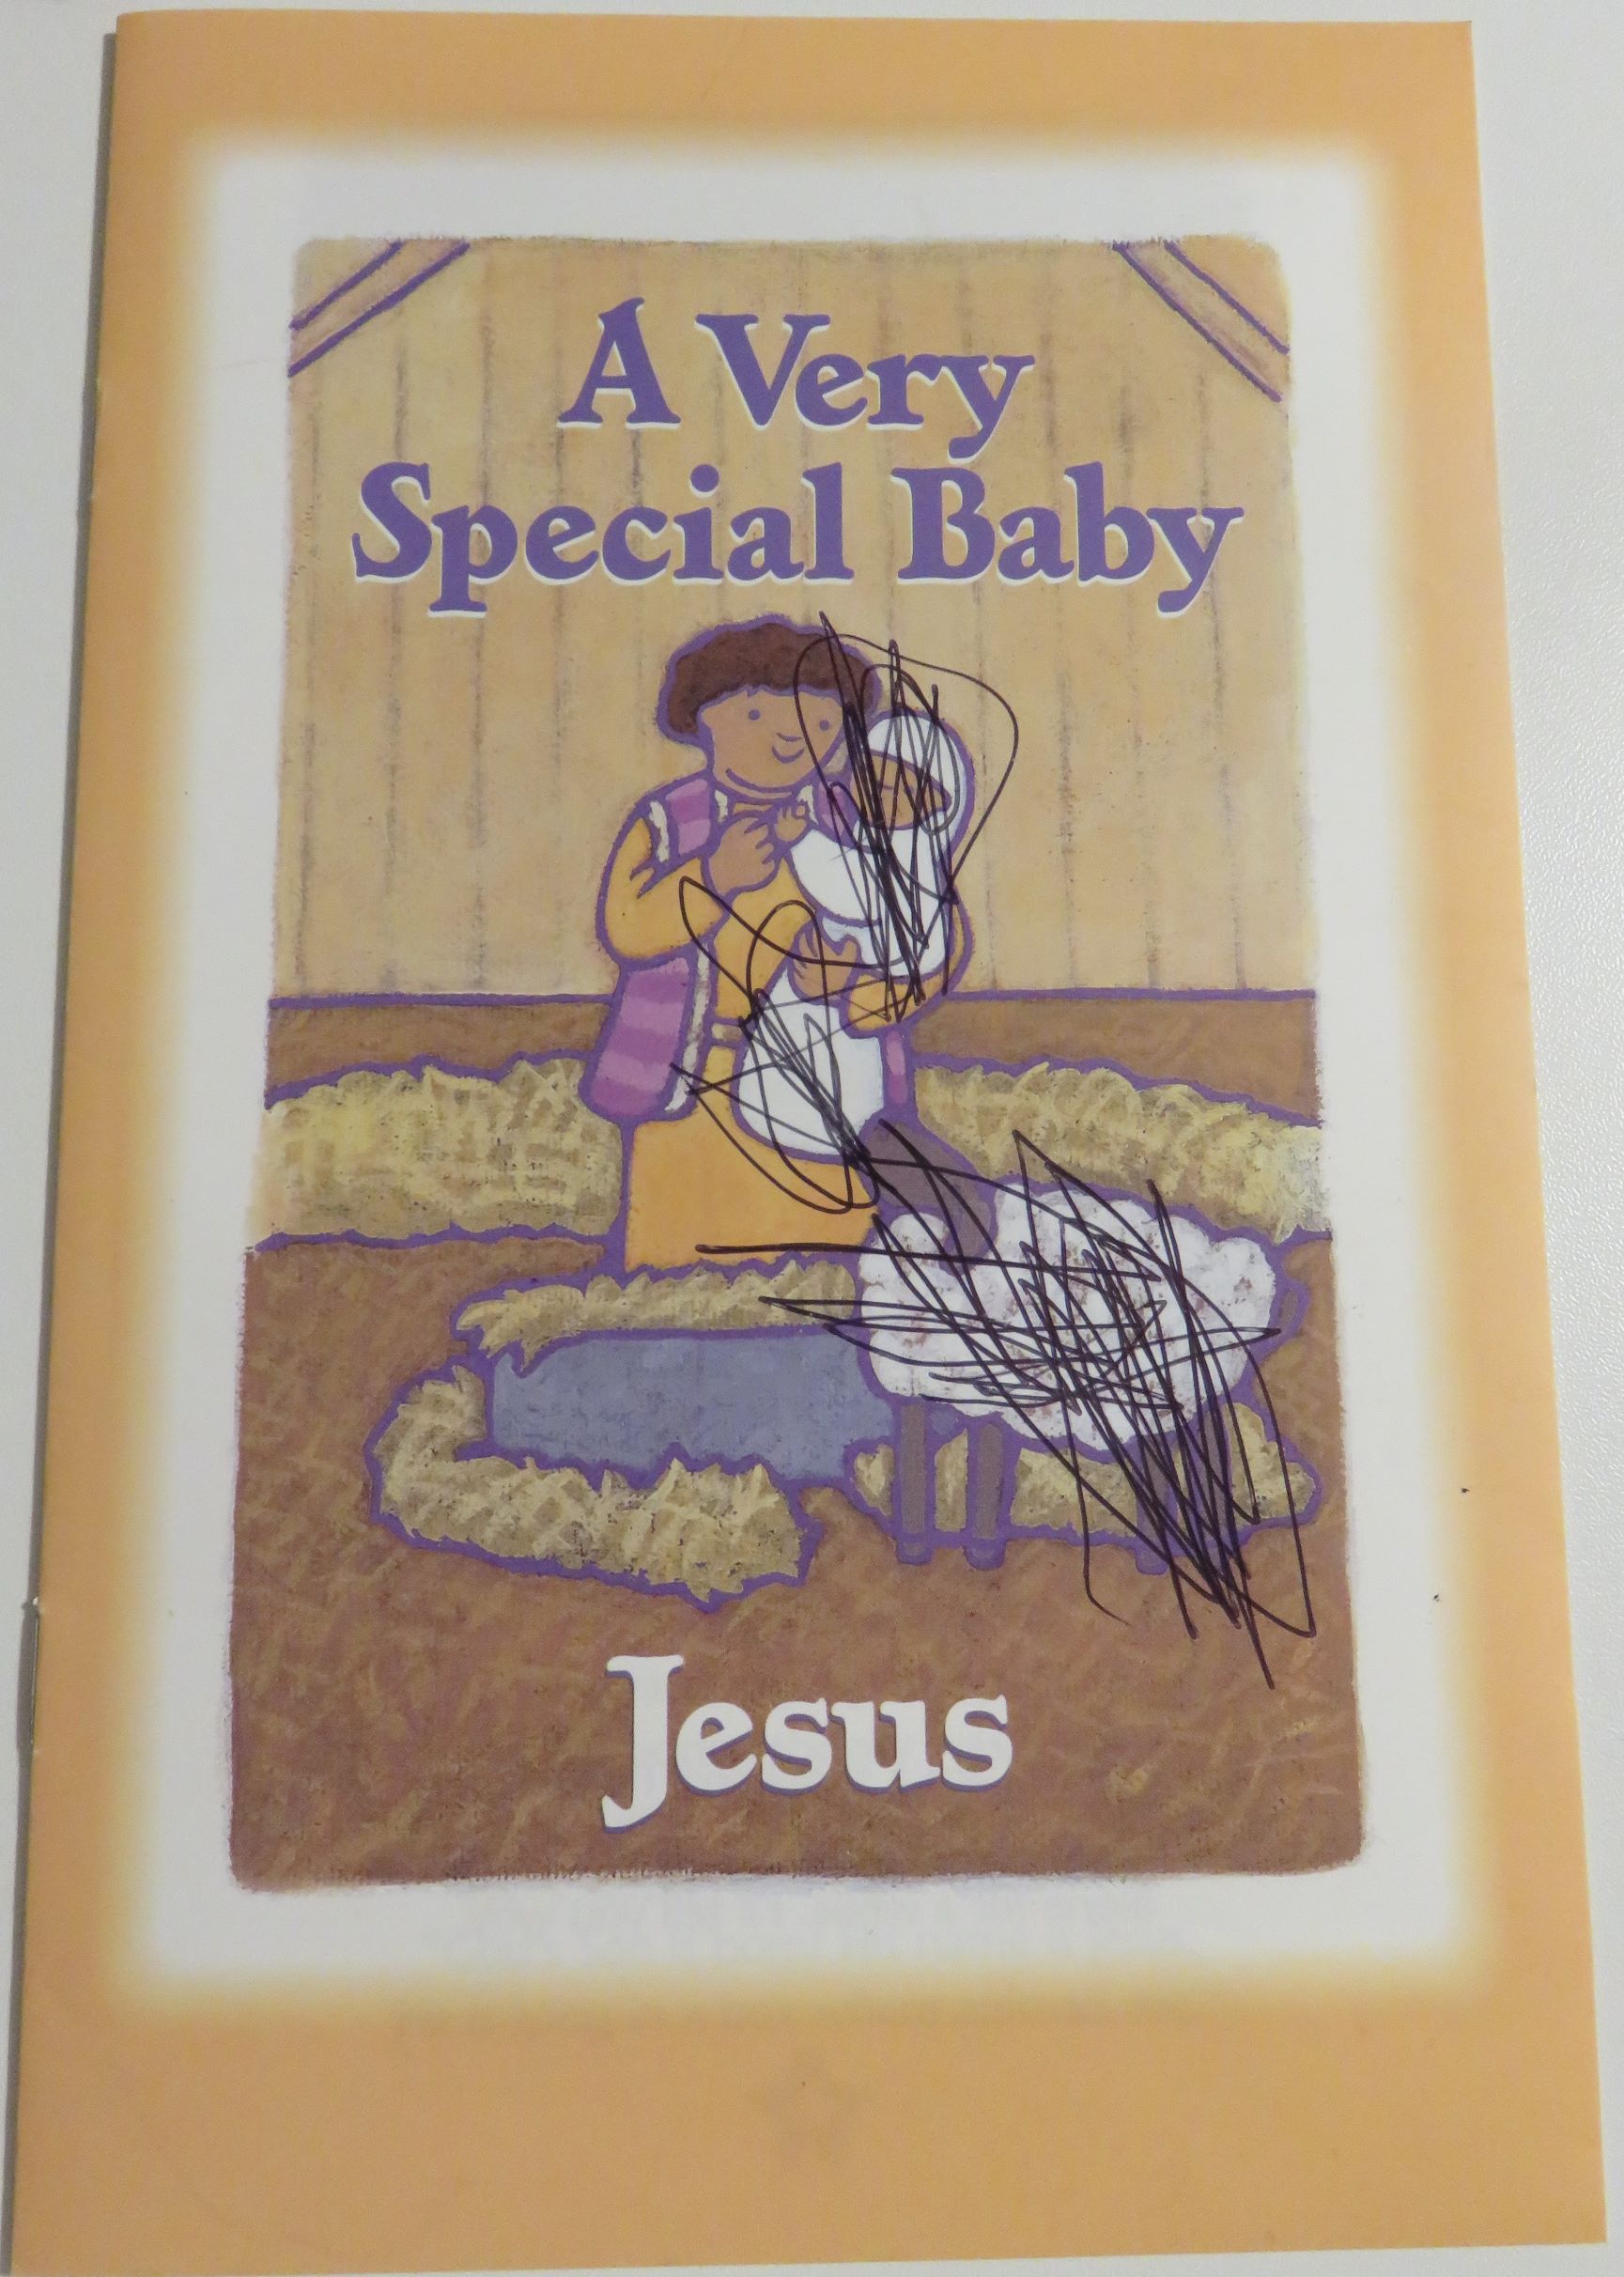 A Very Special Baby Jesus